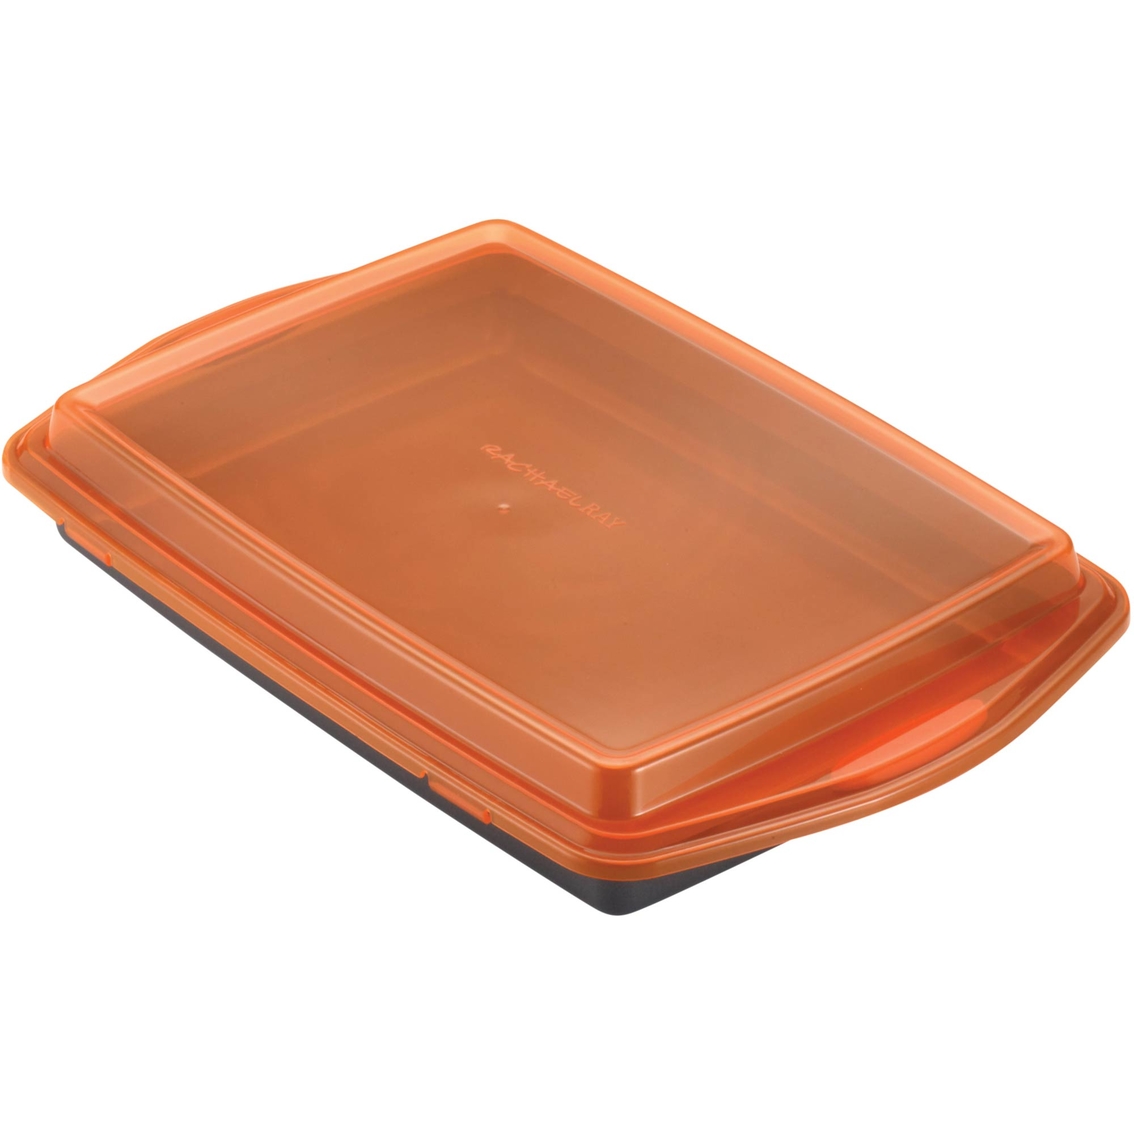 Rachael Ray Nonstick Bakeware 9 x 13 In. Covered Cake Pan - Image 3 of 4